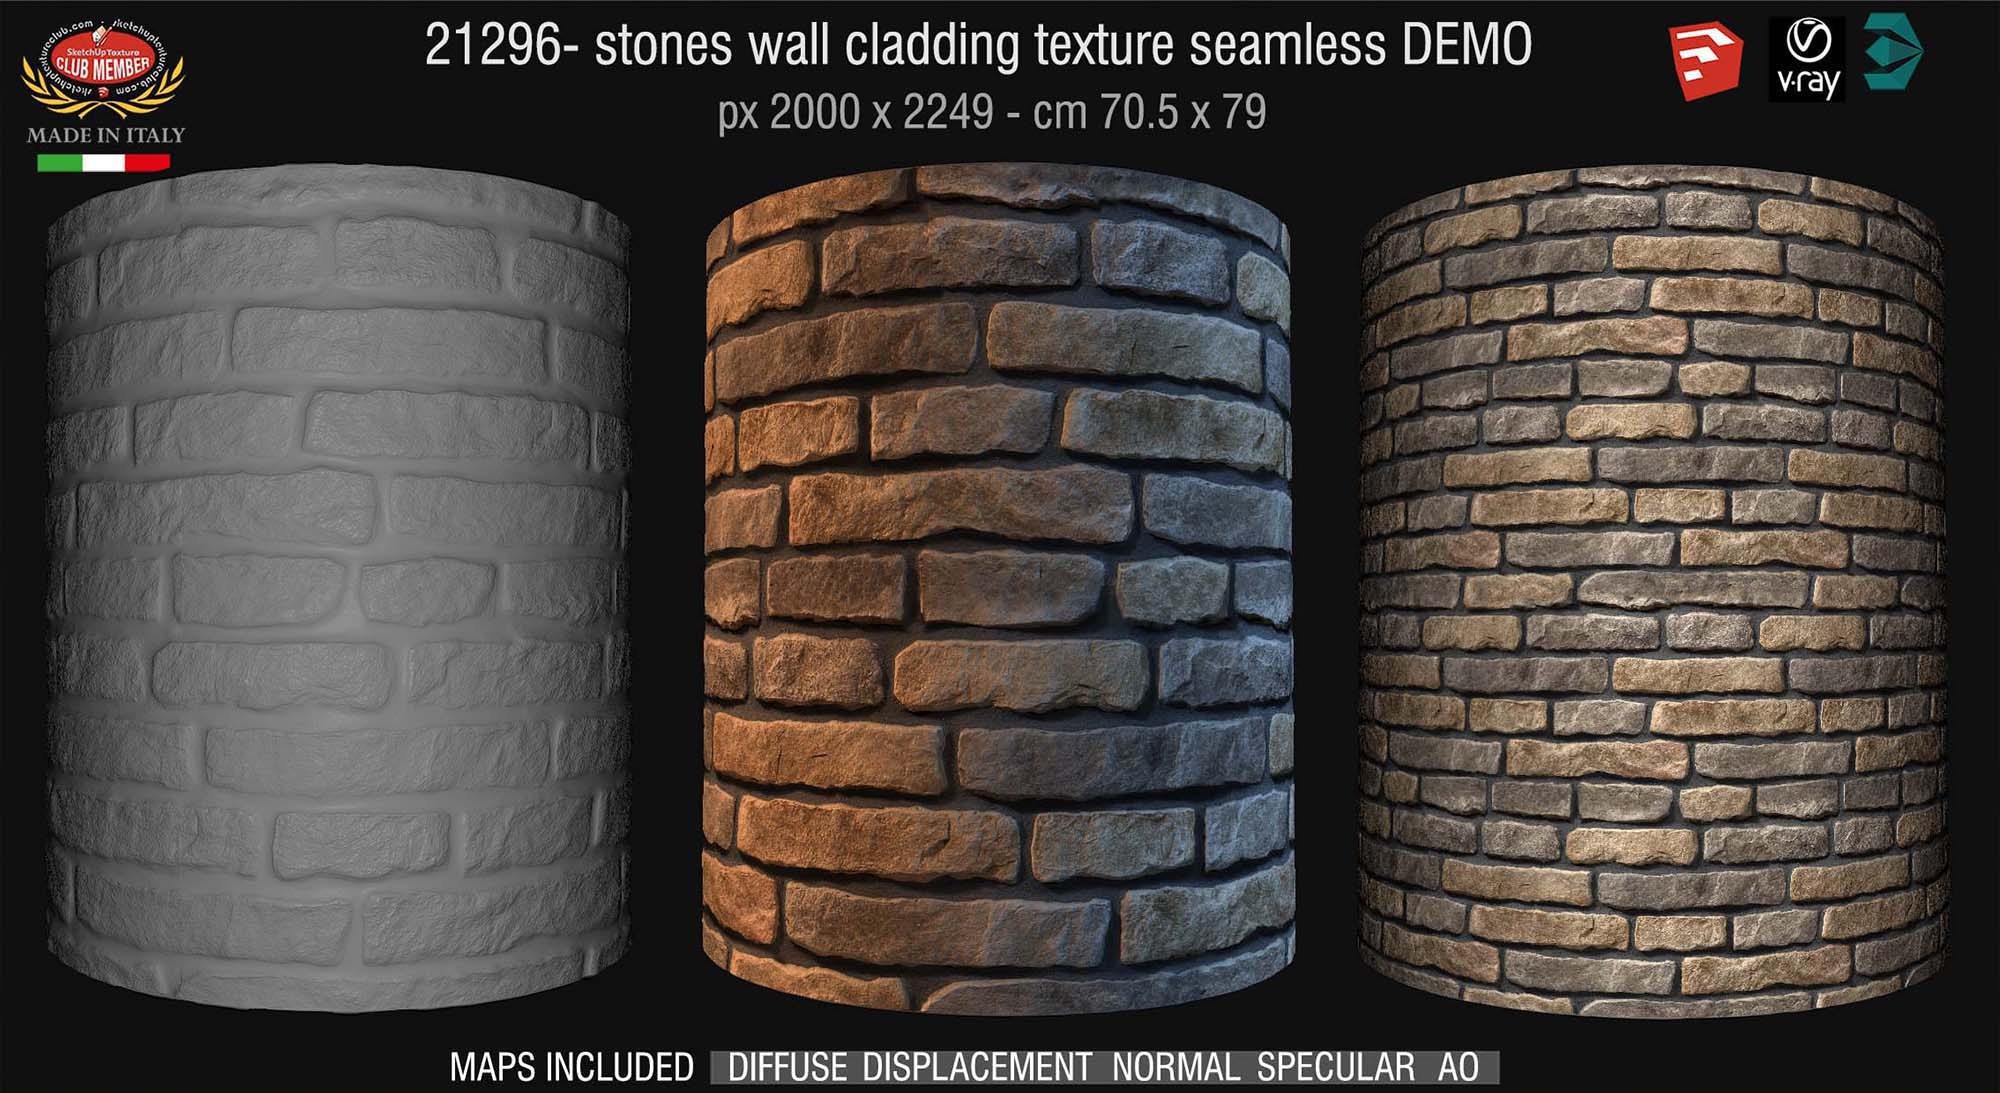 21296 Stones wall cladding texture + maps DEMO